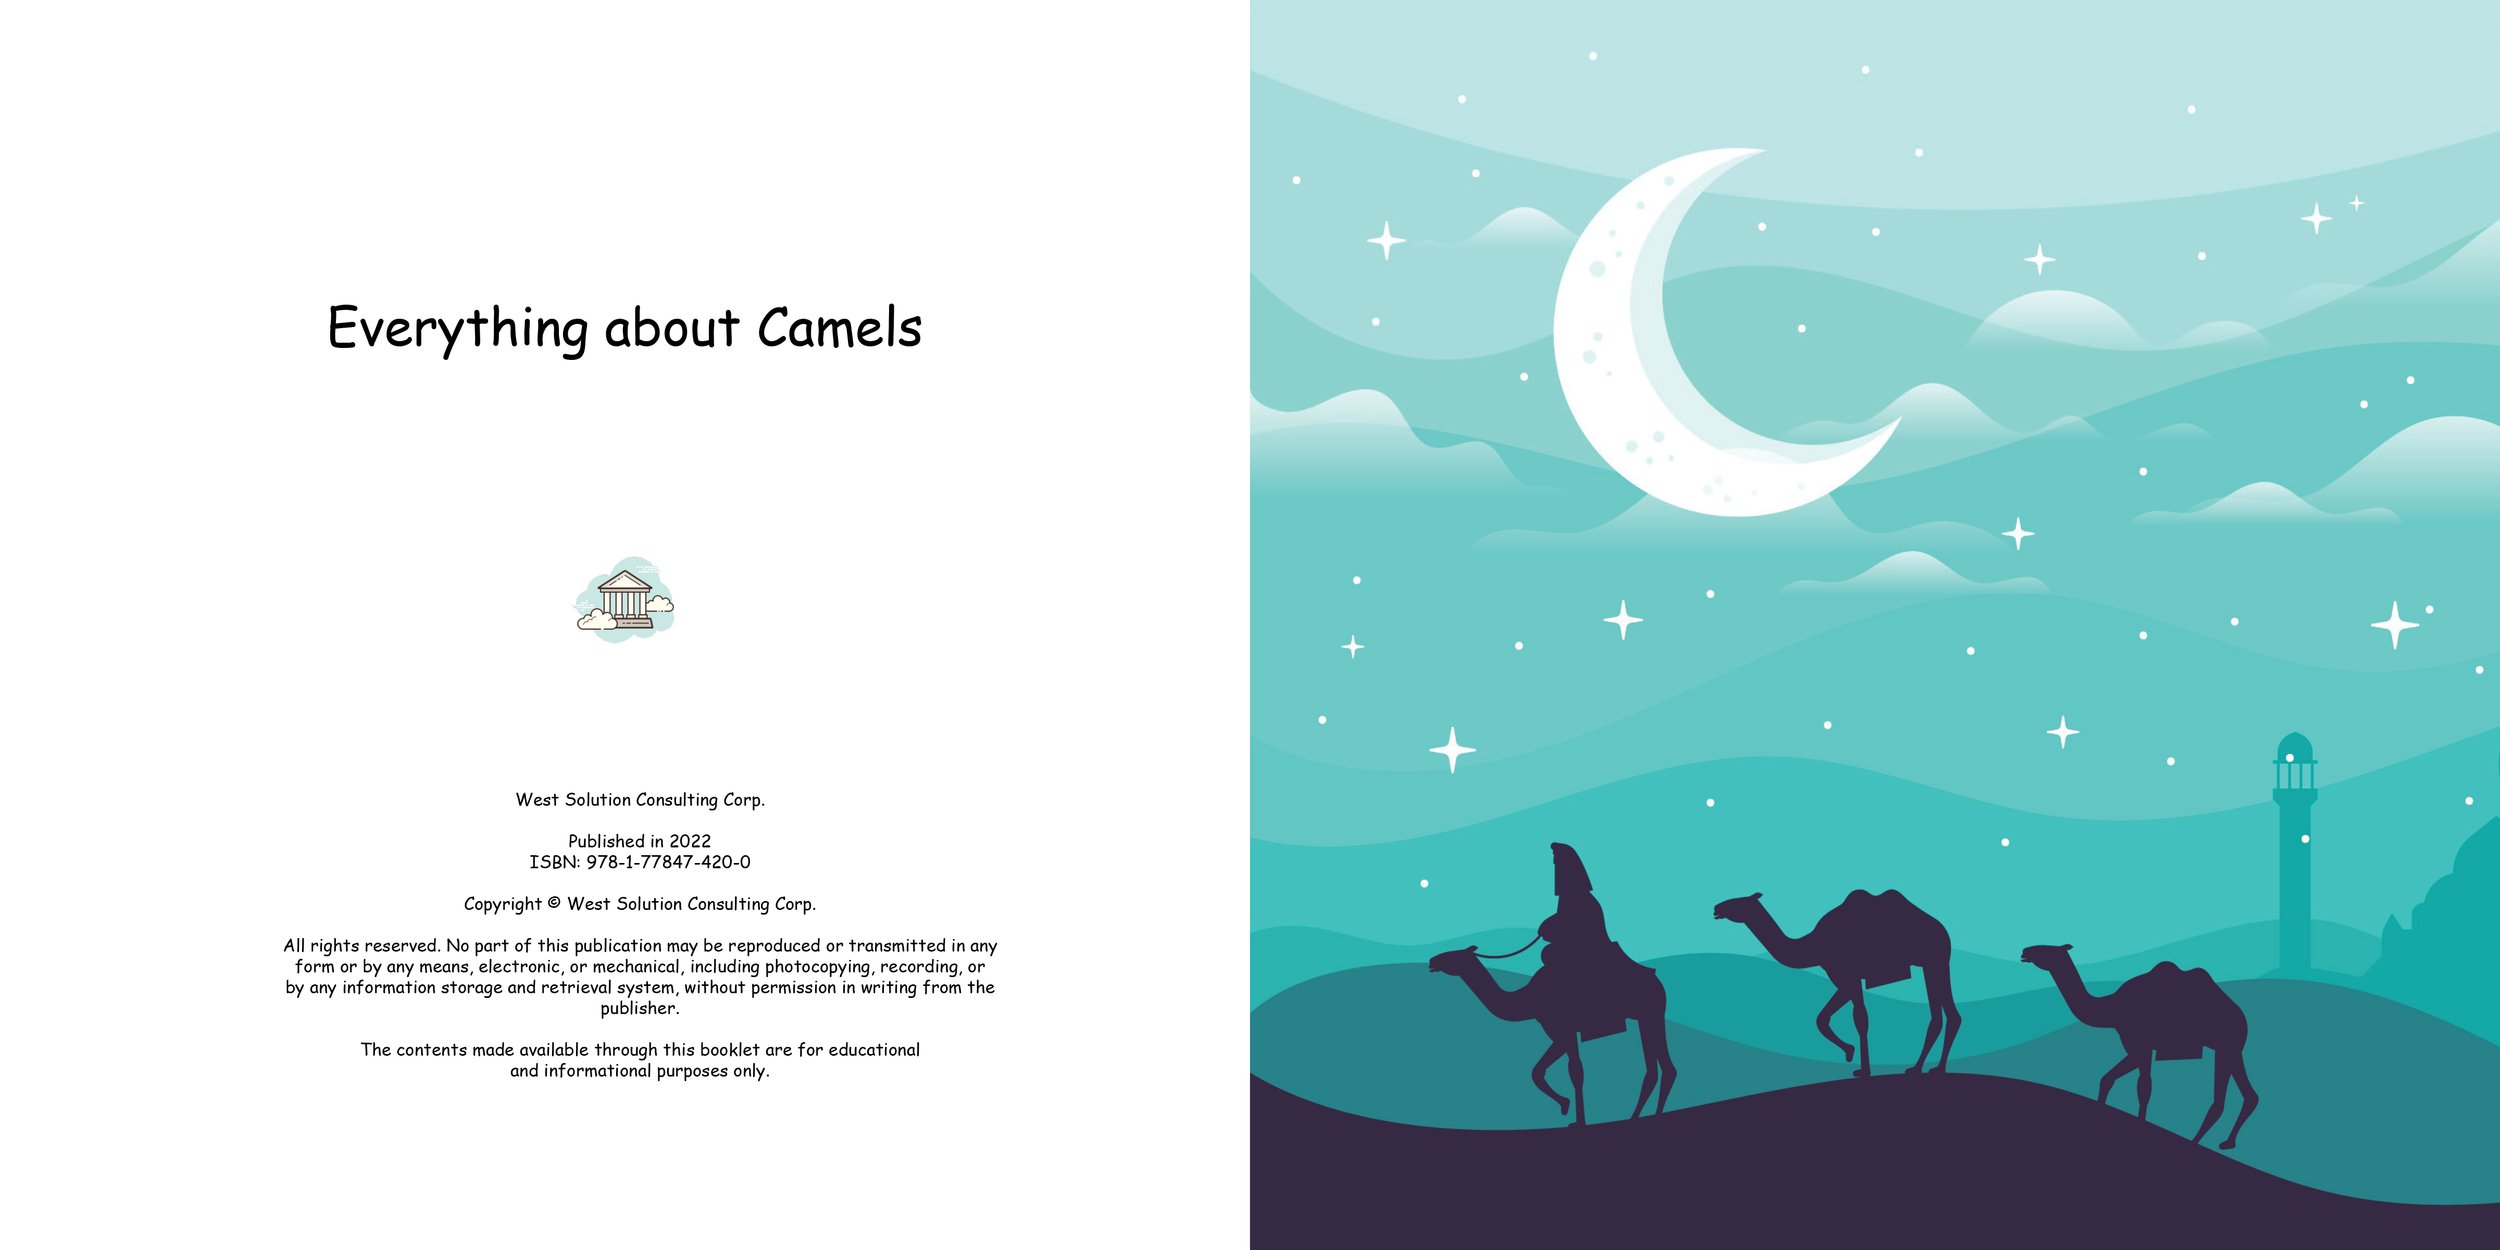 Everything about Camels2.jpg